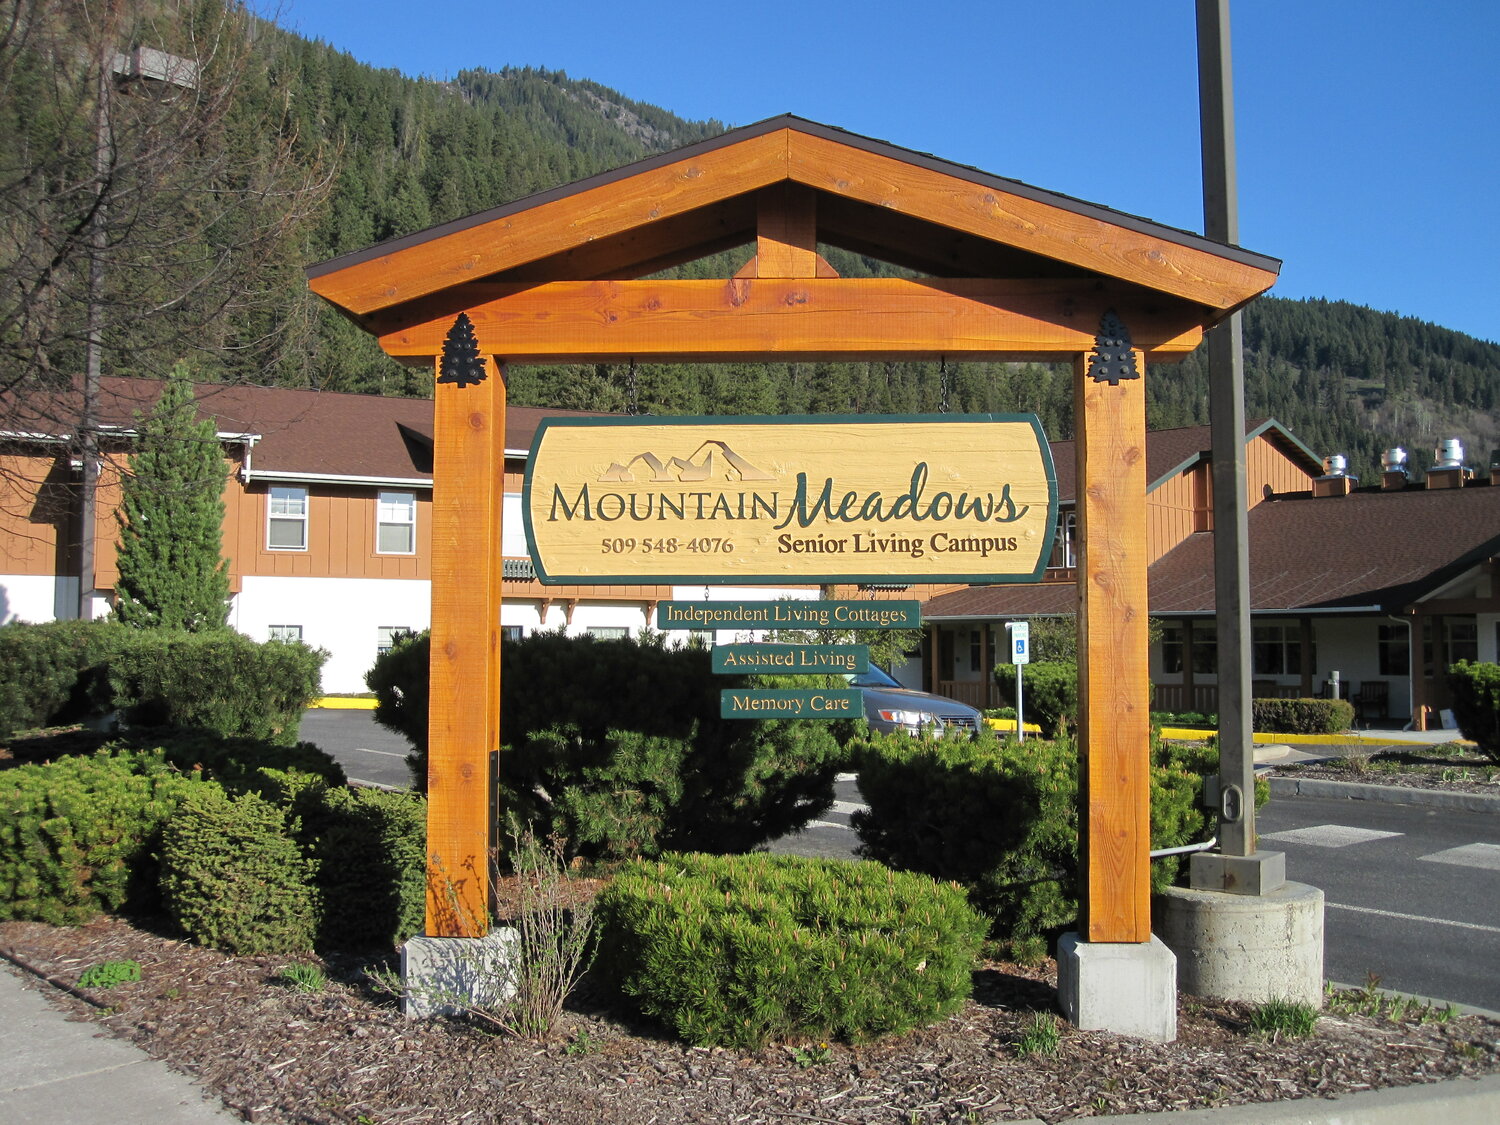 Mountain Meadows Assisted Living Campus
File Photo